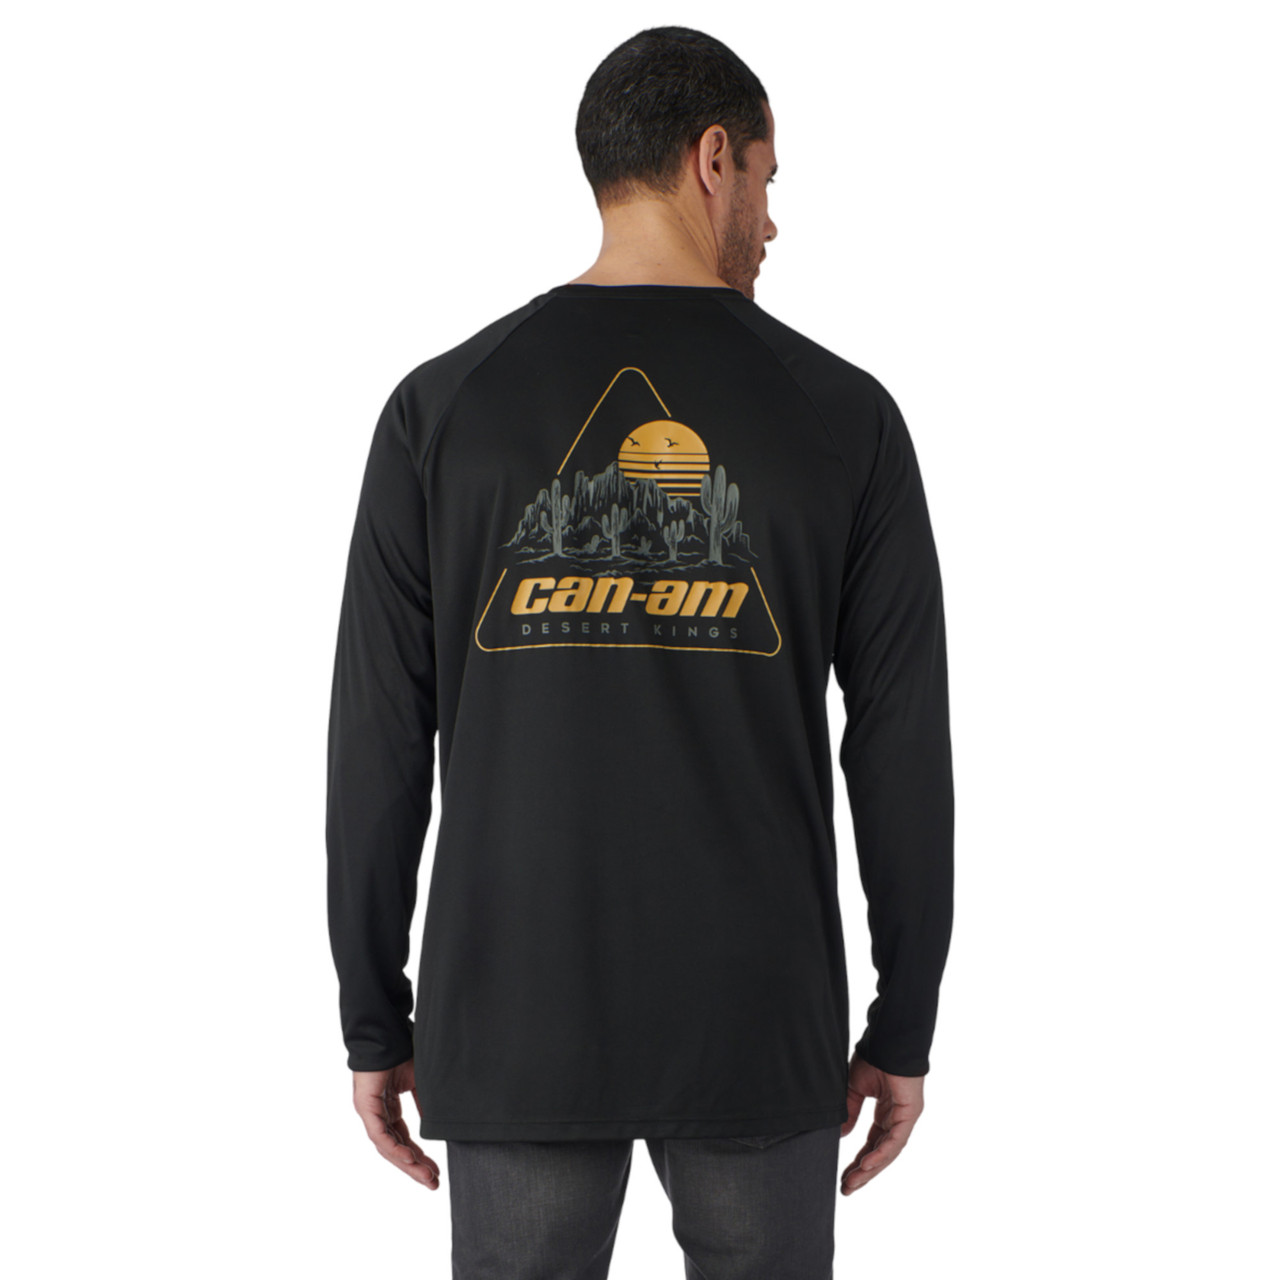 Can-Am New OEM, Men's Large Branded Cotton Performance LS Tee, 4547640990